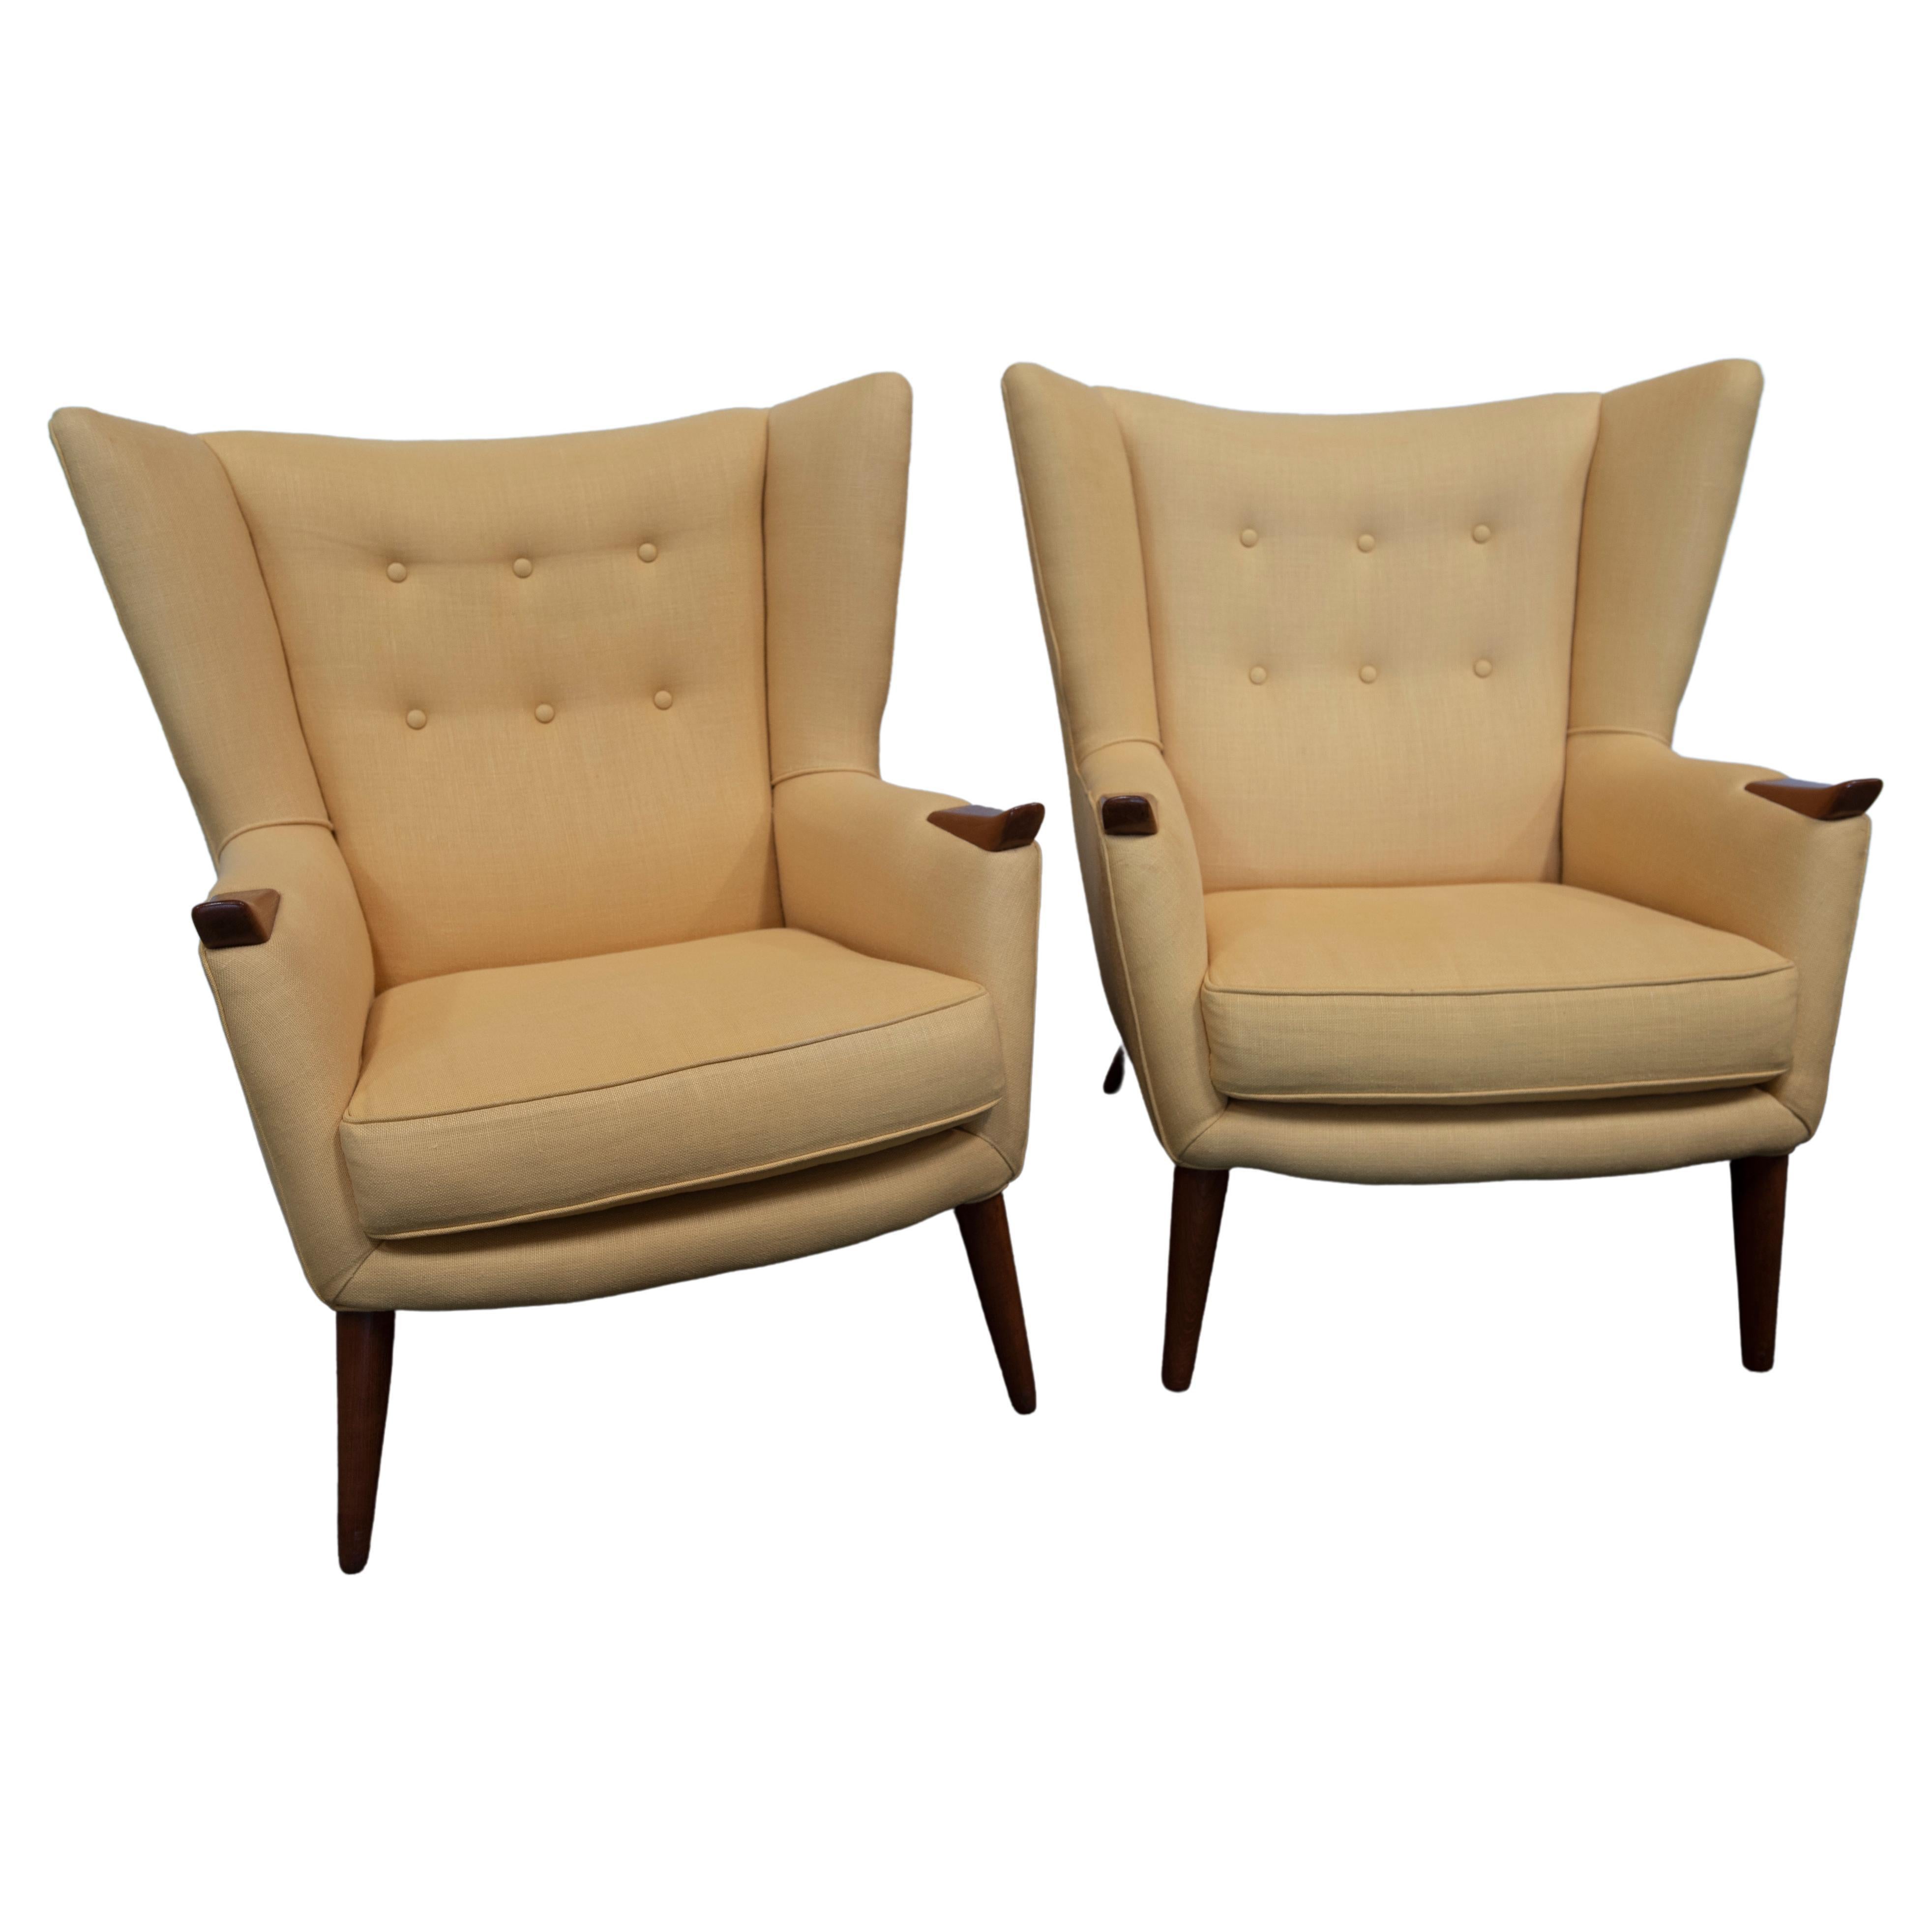 DANISH MODERN Lounge Chairs [PAIR] For Sale